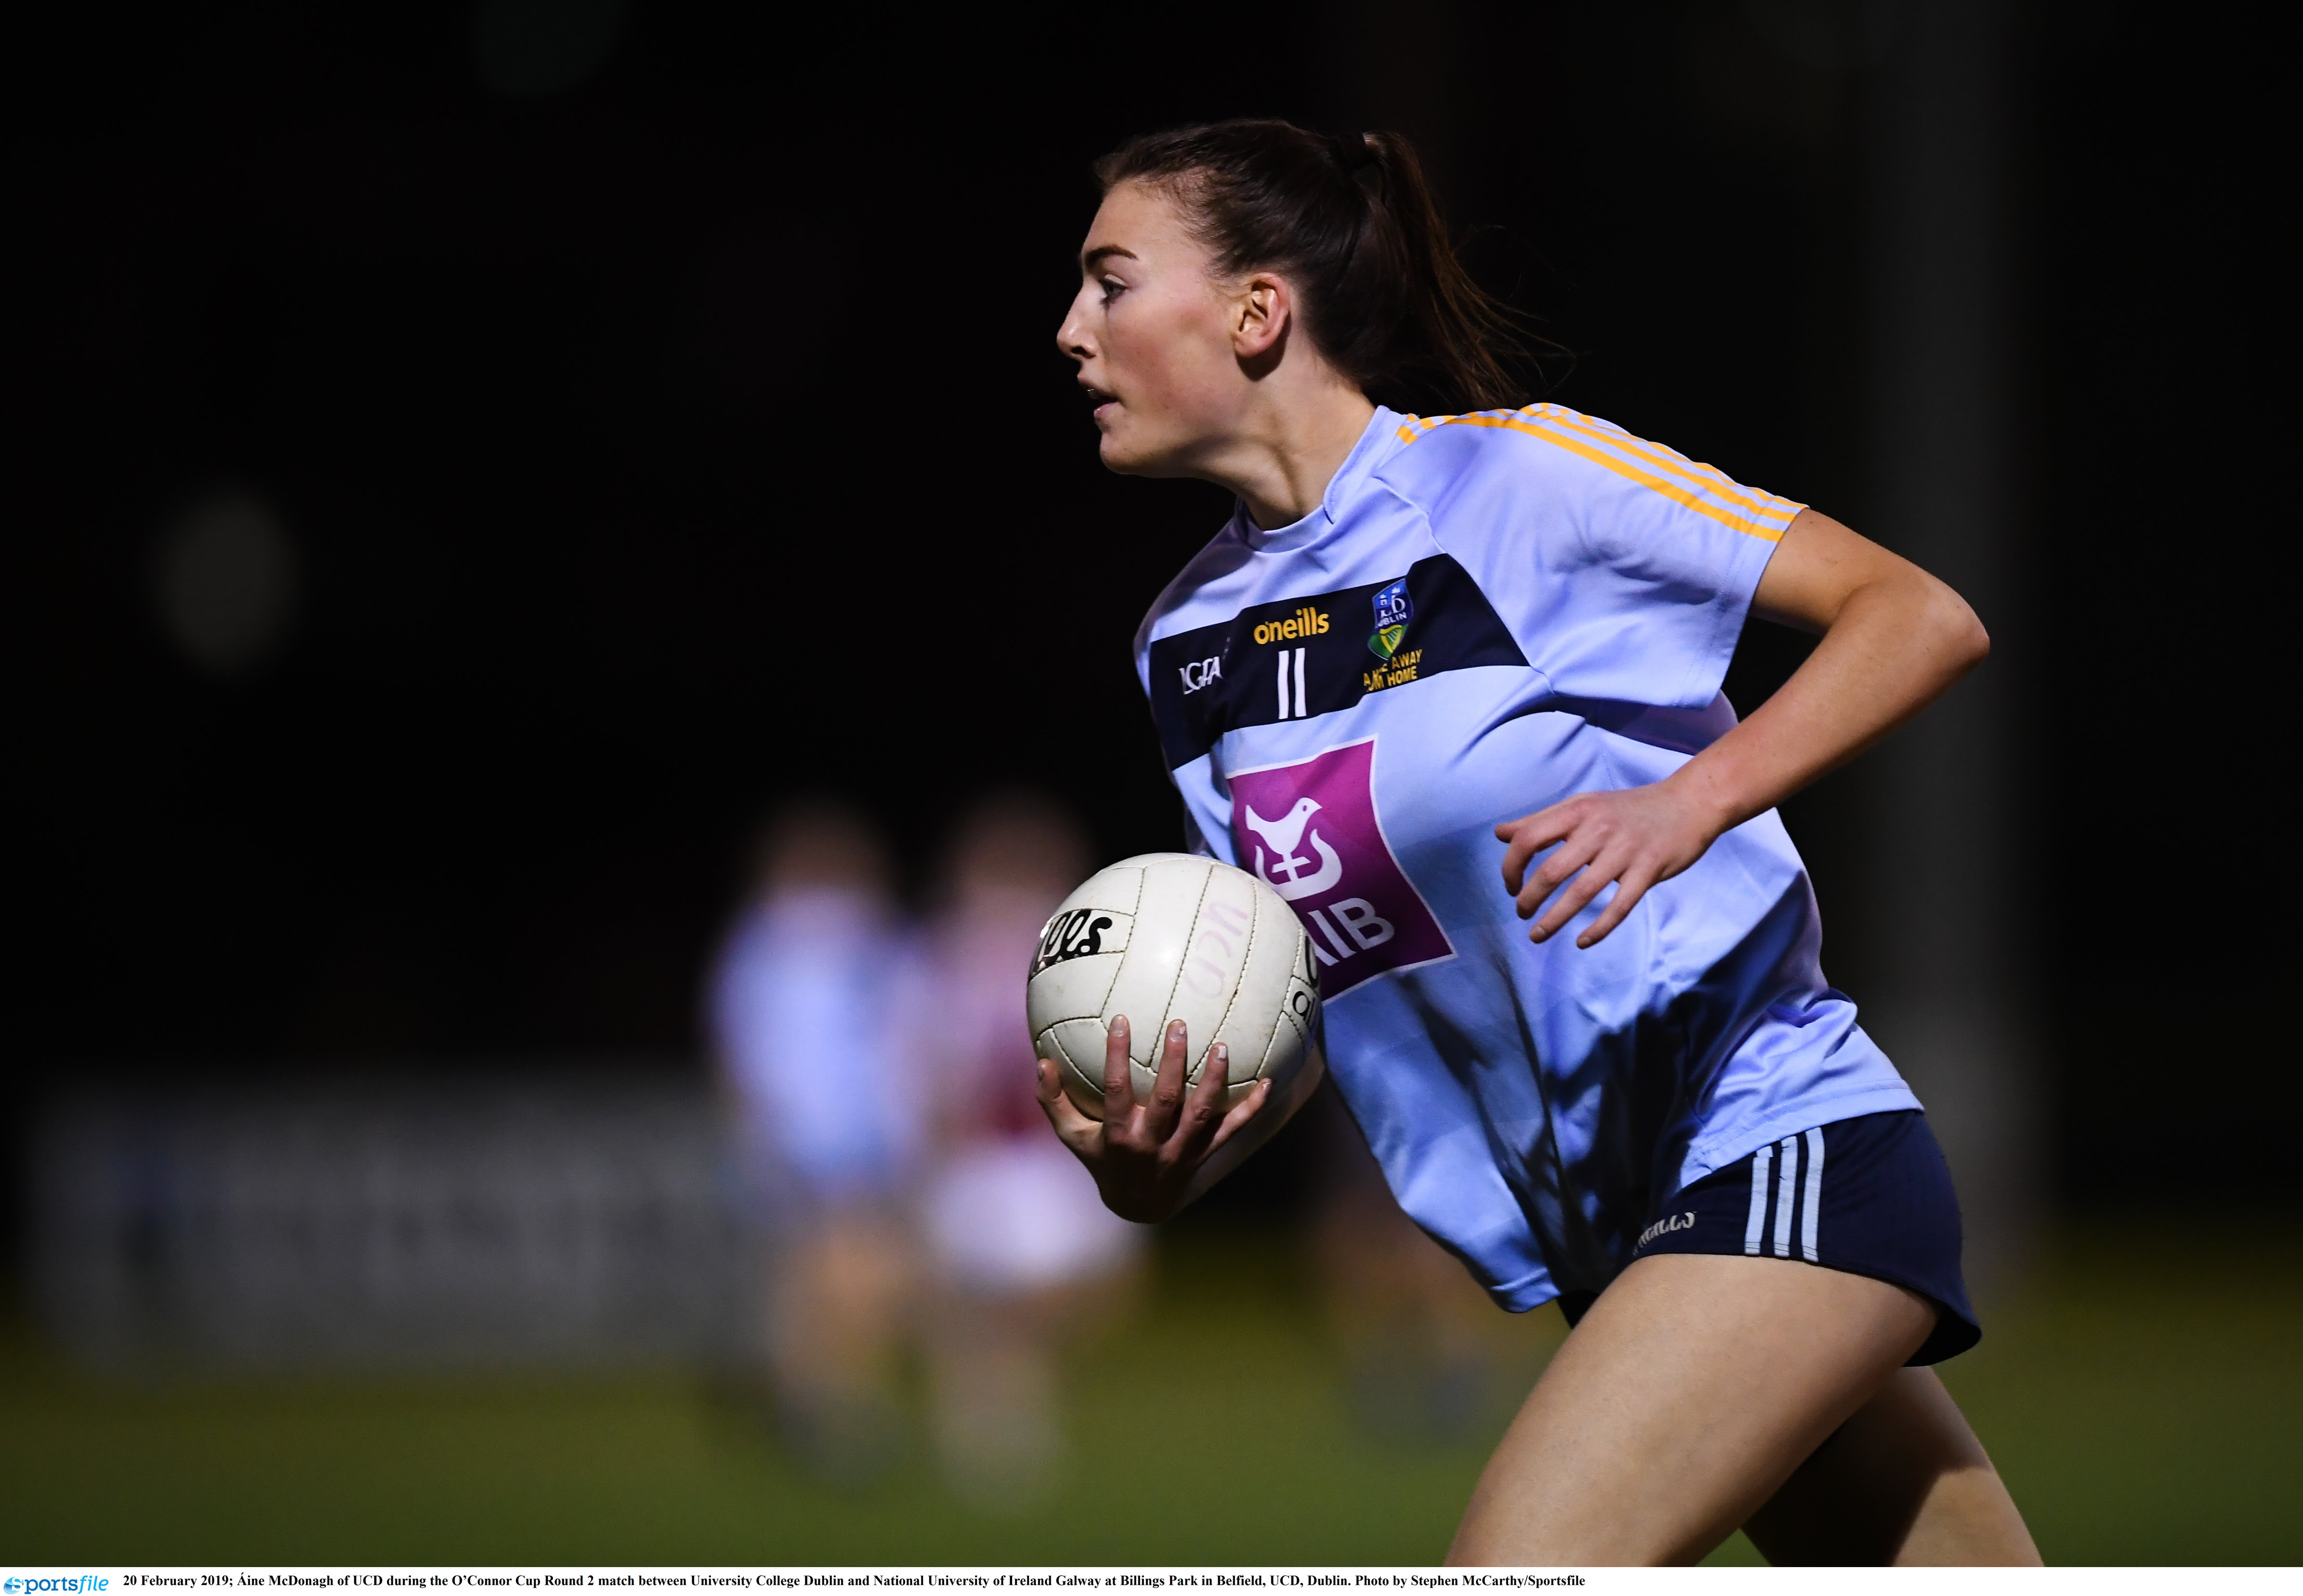 Click Here for more information on the UCD Ladies Gaelic Football Club